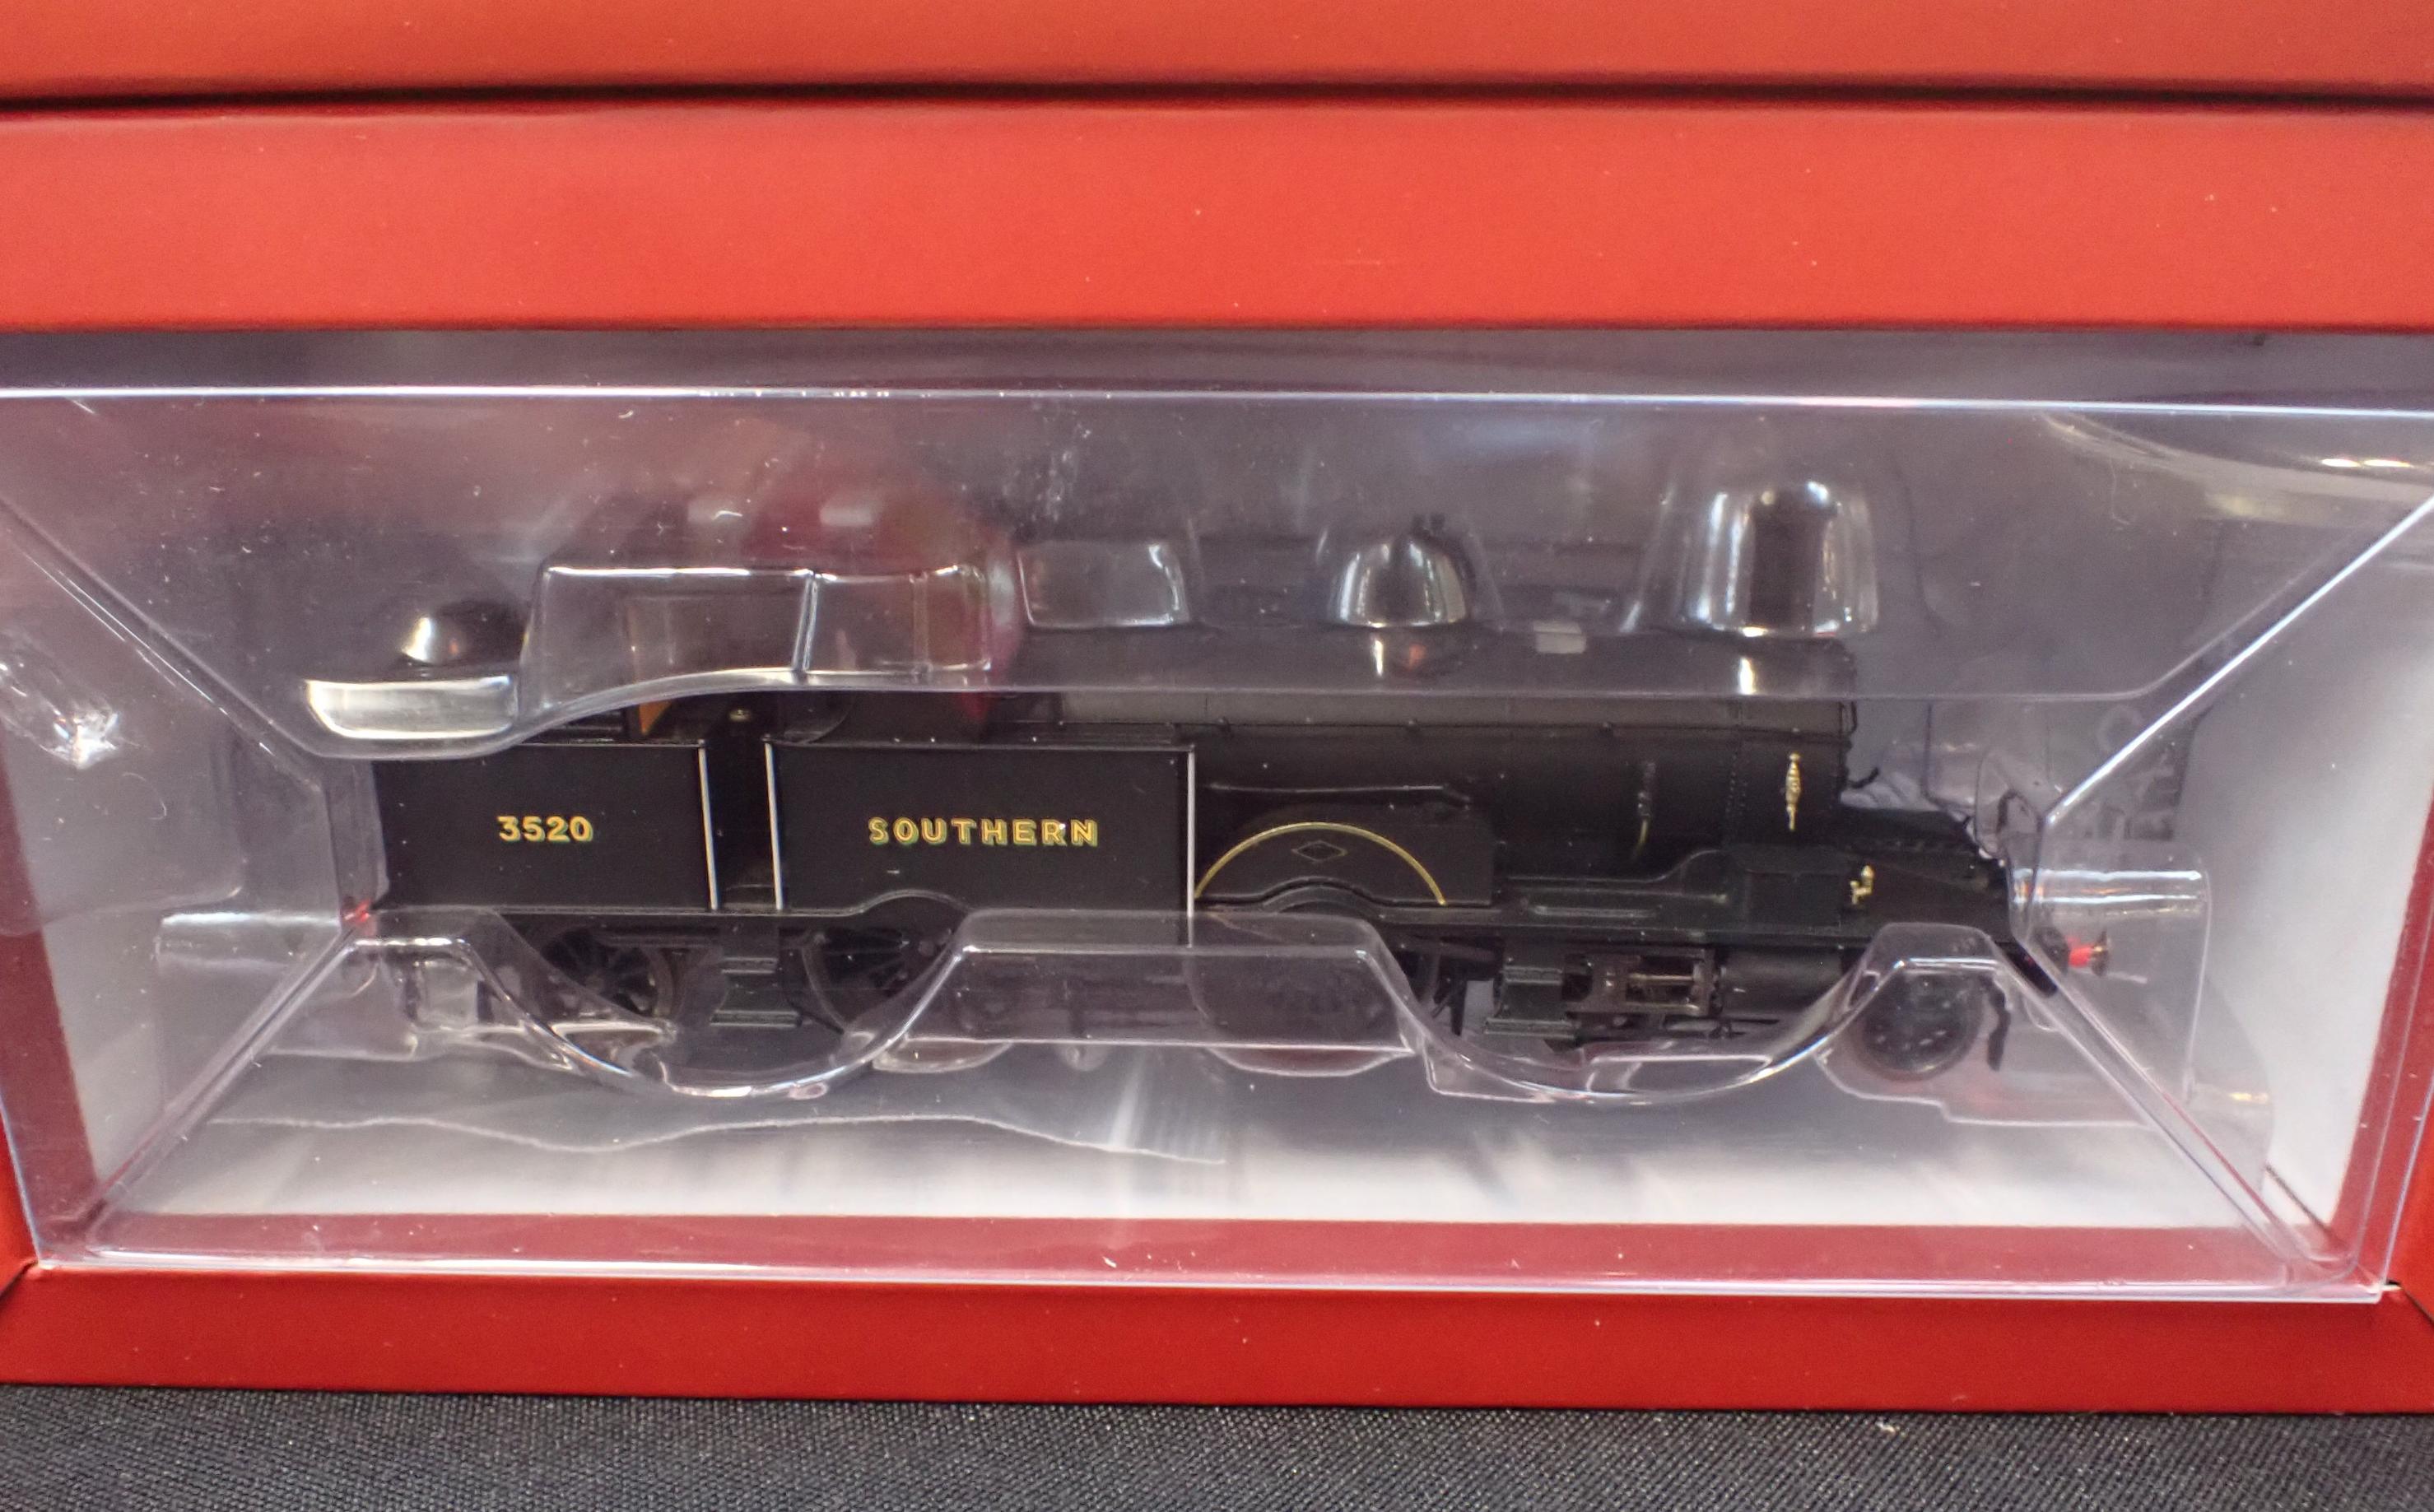 HORNBY 00 GAUGE LOCOMOTIVES BOXED AS NEW - Image 3 of 3